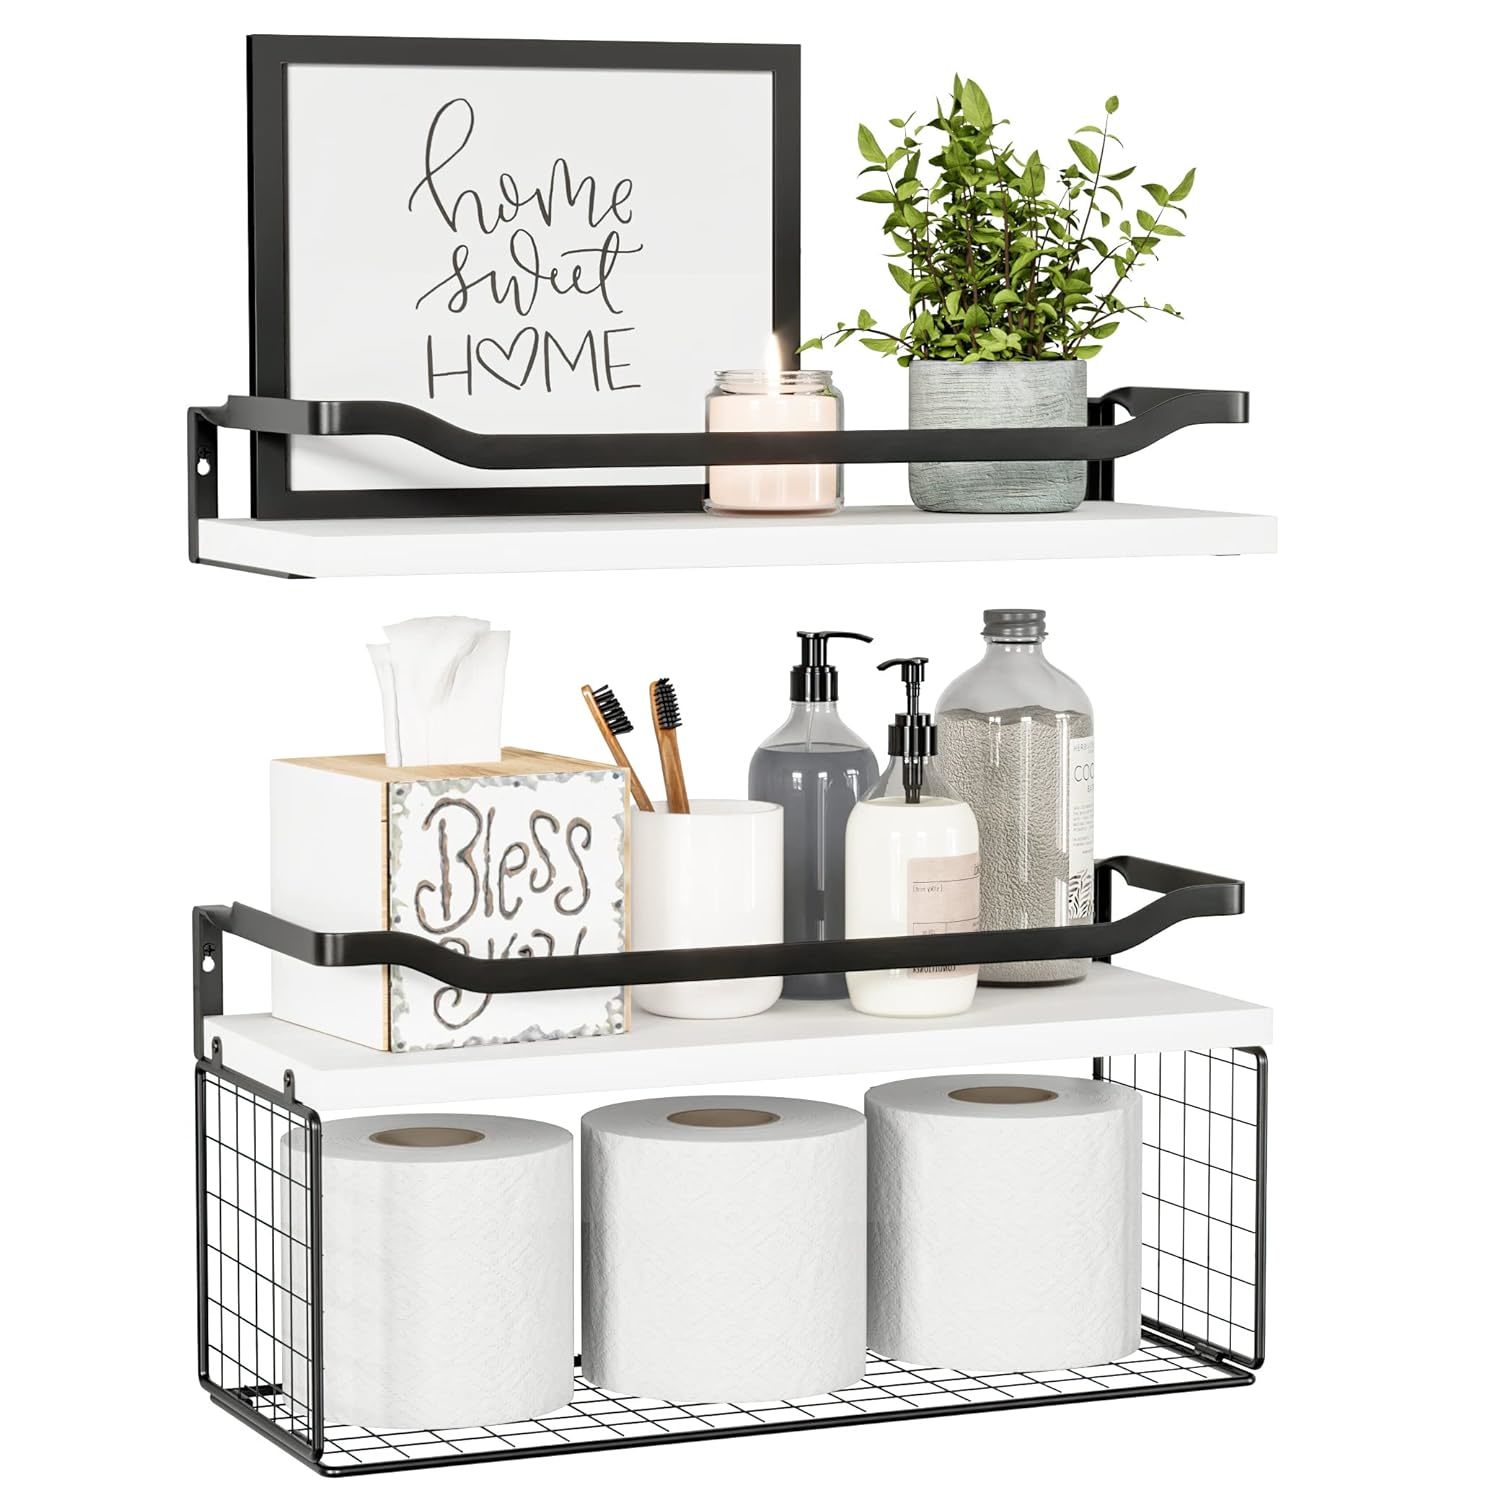 Primary image for Floating Shelves With Wire Storage Basket, Bathroom Shelves Over Toilet With Pro